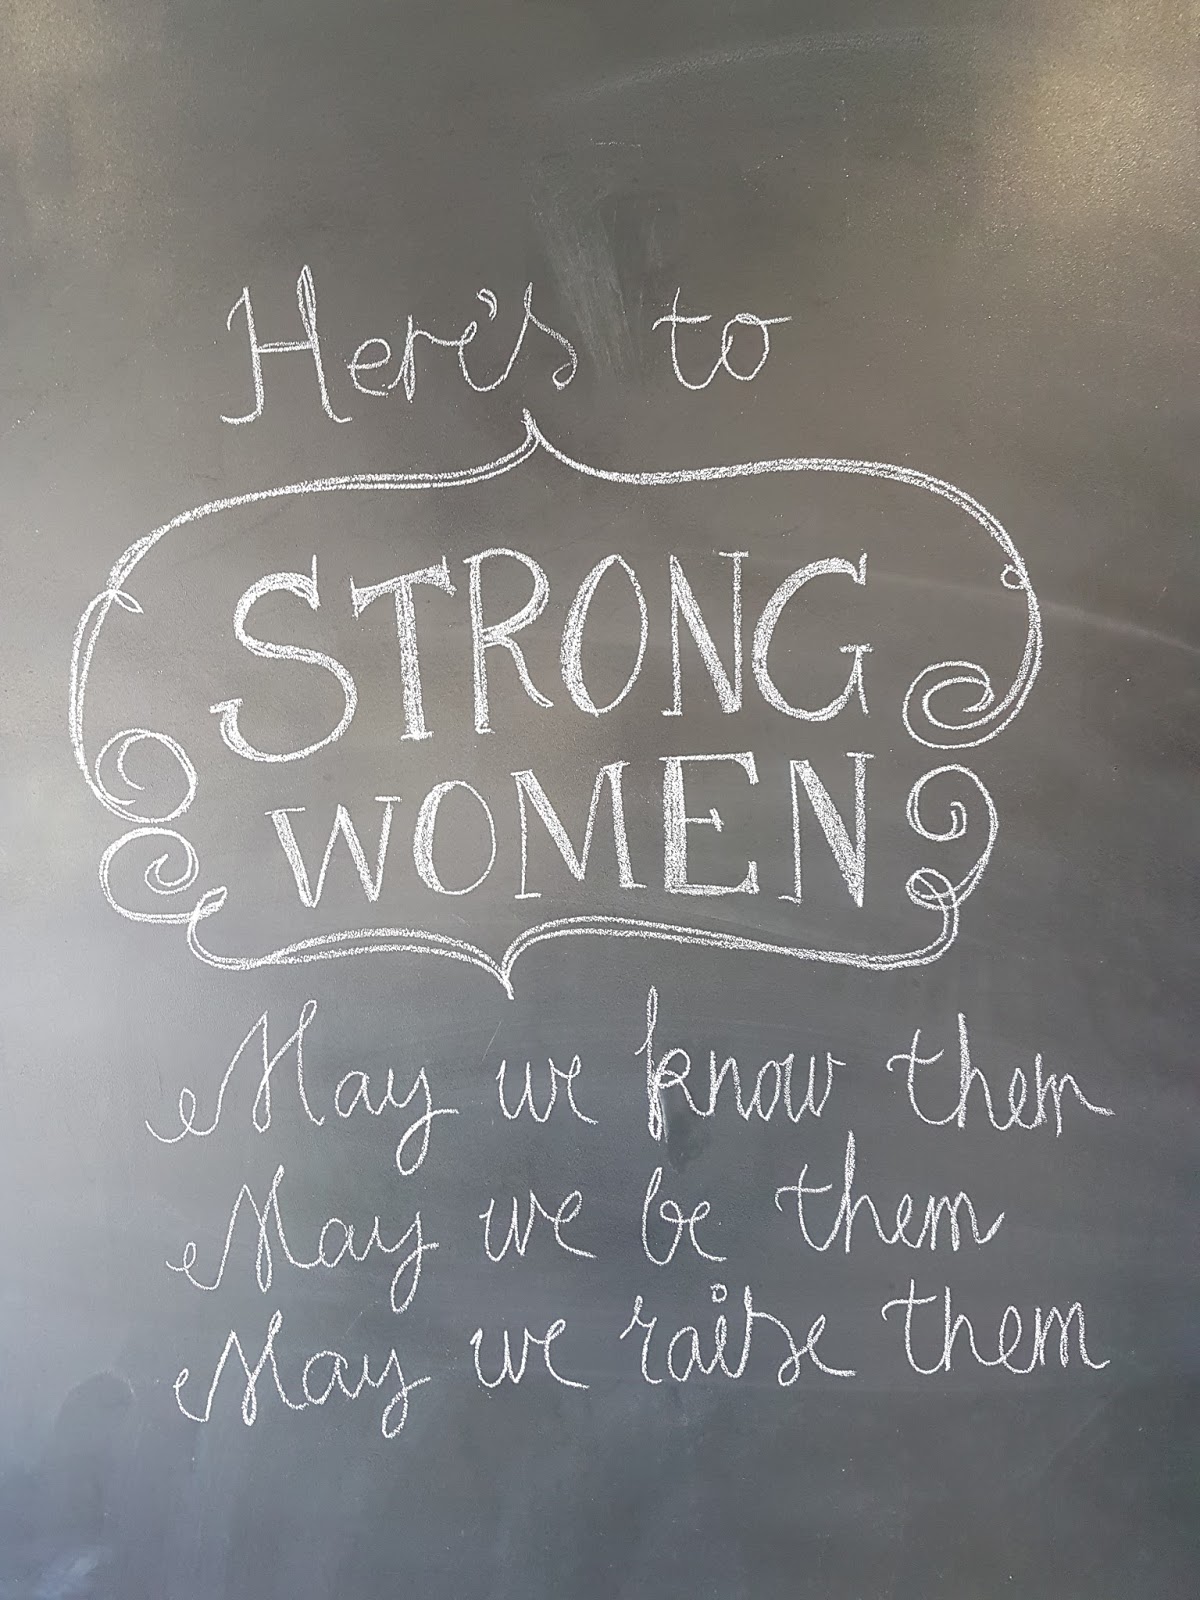 chalkboard wall with here's to strong women quote